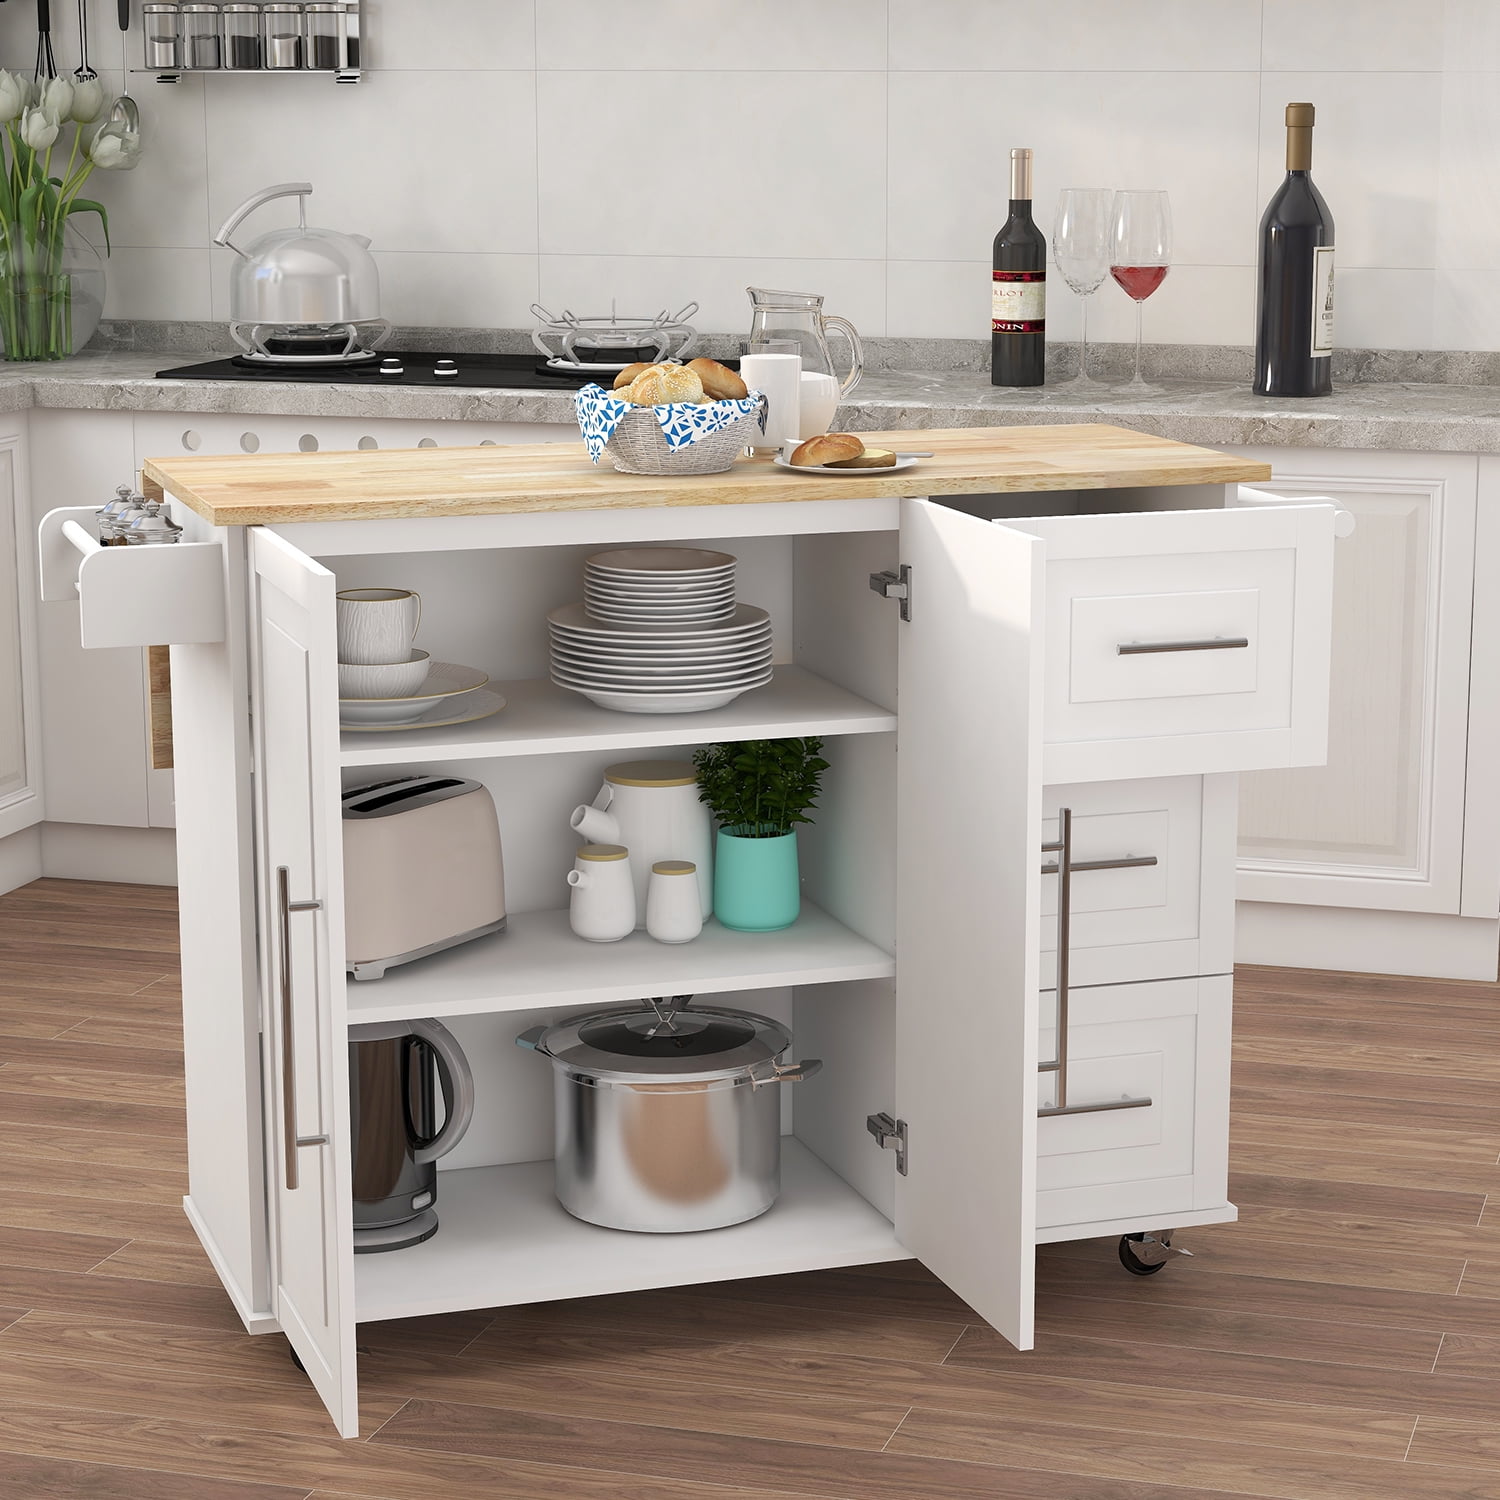 slidbane Advarsel køkken Kitchen Cupboard Table with Drawers and Cabinets, Wood Convertible Storage  Cabinet Table with Spice Rack, Handle, Caster and Extensible Table Top for  Dining Room Living Room, White - Walmart.com